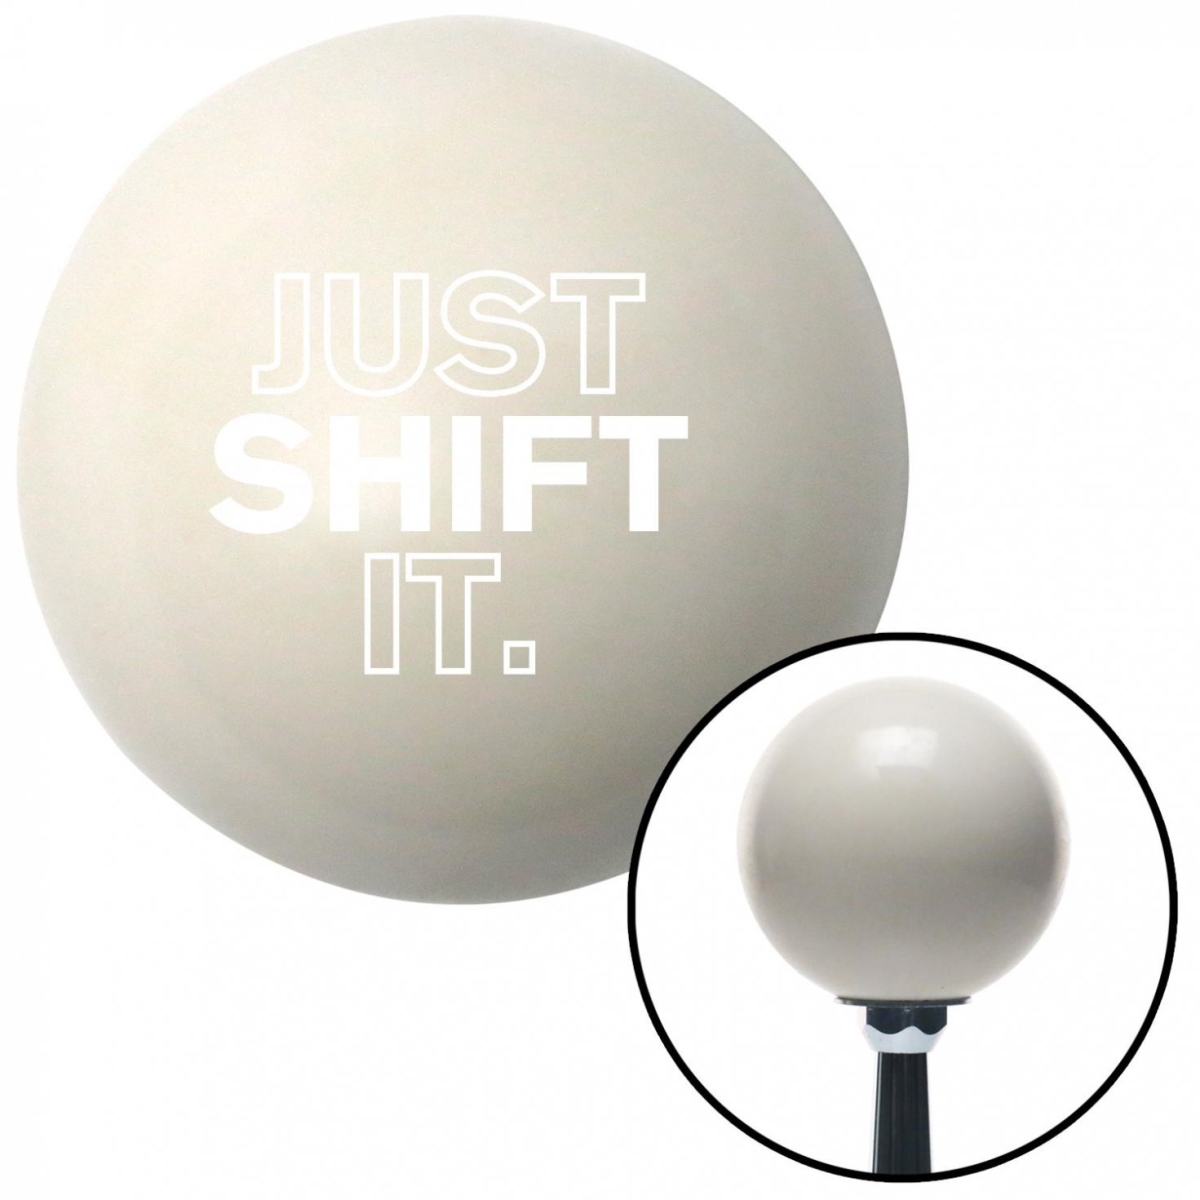 American Shifter 34362 White Just Shift It. Ivory Shift Knob with M16 x 1.5 Insert Shifter Auto Manual -  American Shifter Company